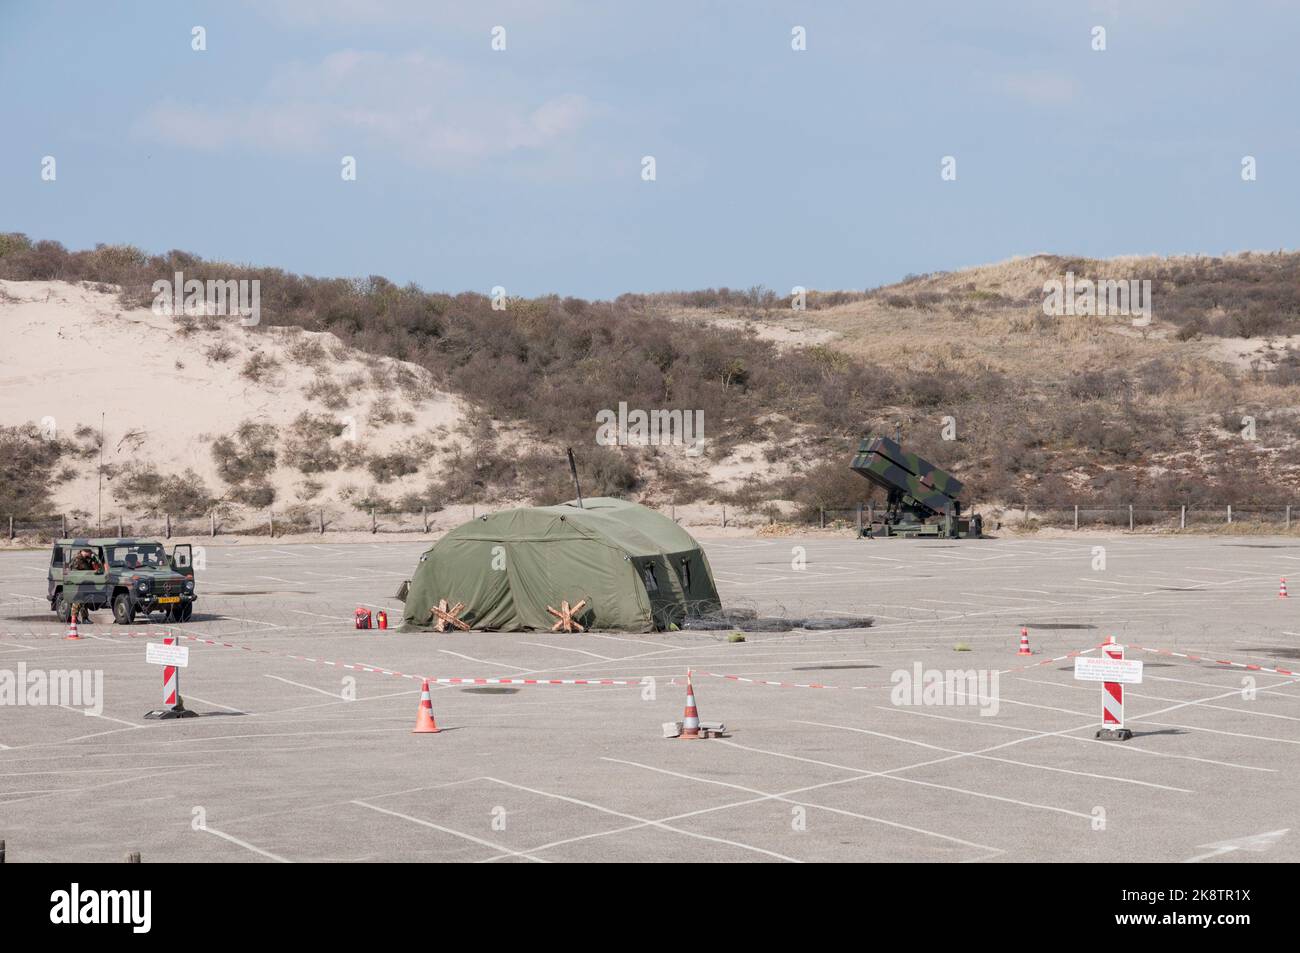 03-24-2014.The Hague,The Netherlands.The 2014 Nuclear Security Summit.Security in the area by the Dutch army. Stock Photo